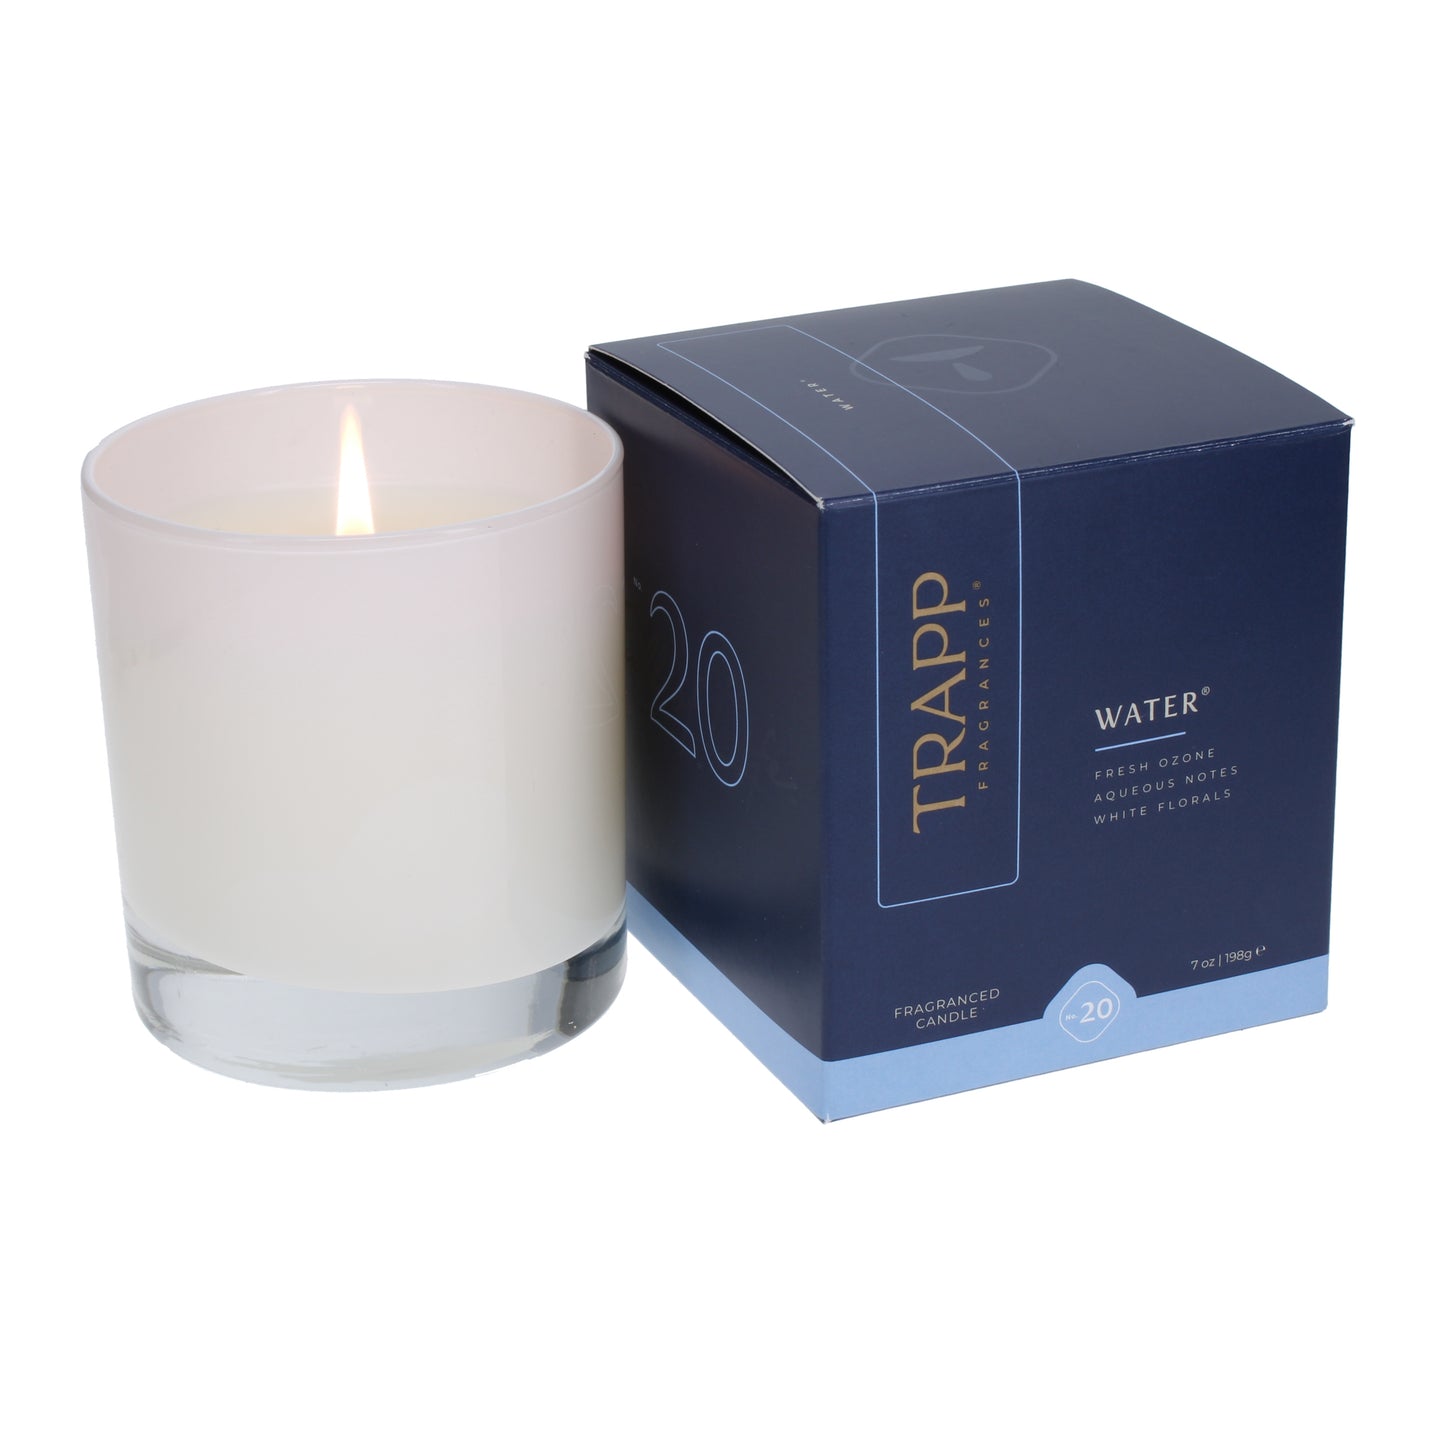 No. 20 Water 7 oz. Candle in Signature Box Image 2